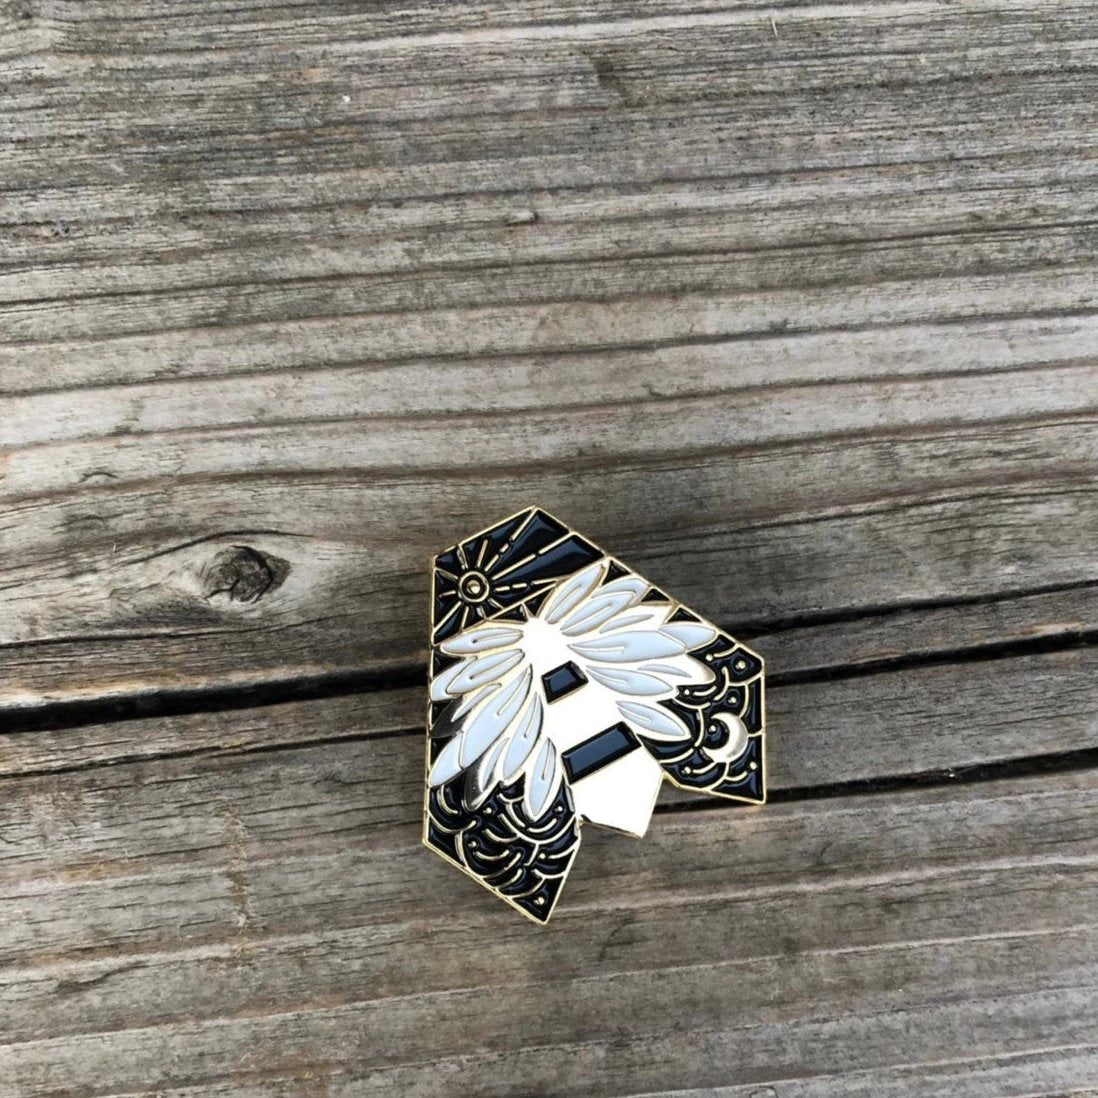 Origami "Save the Bees" Enamel Pin Set